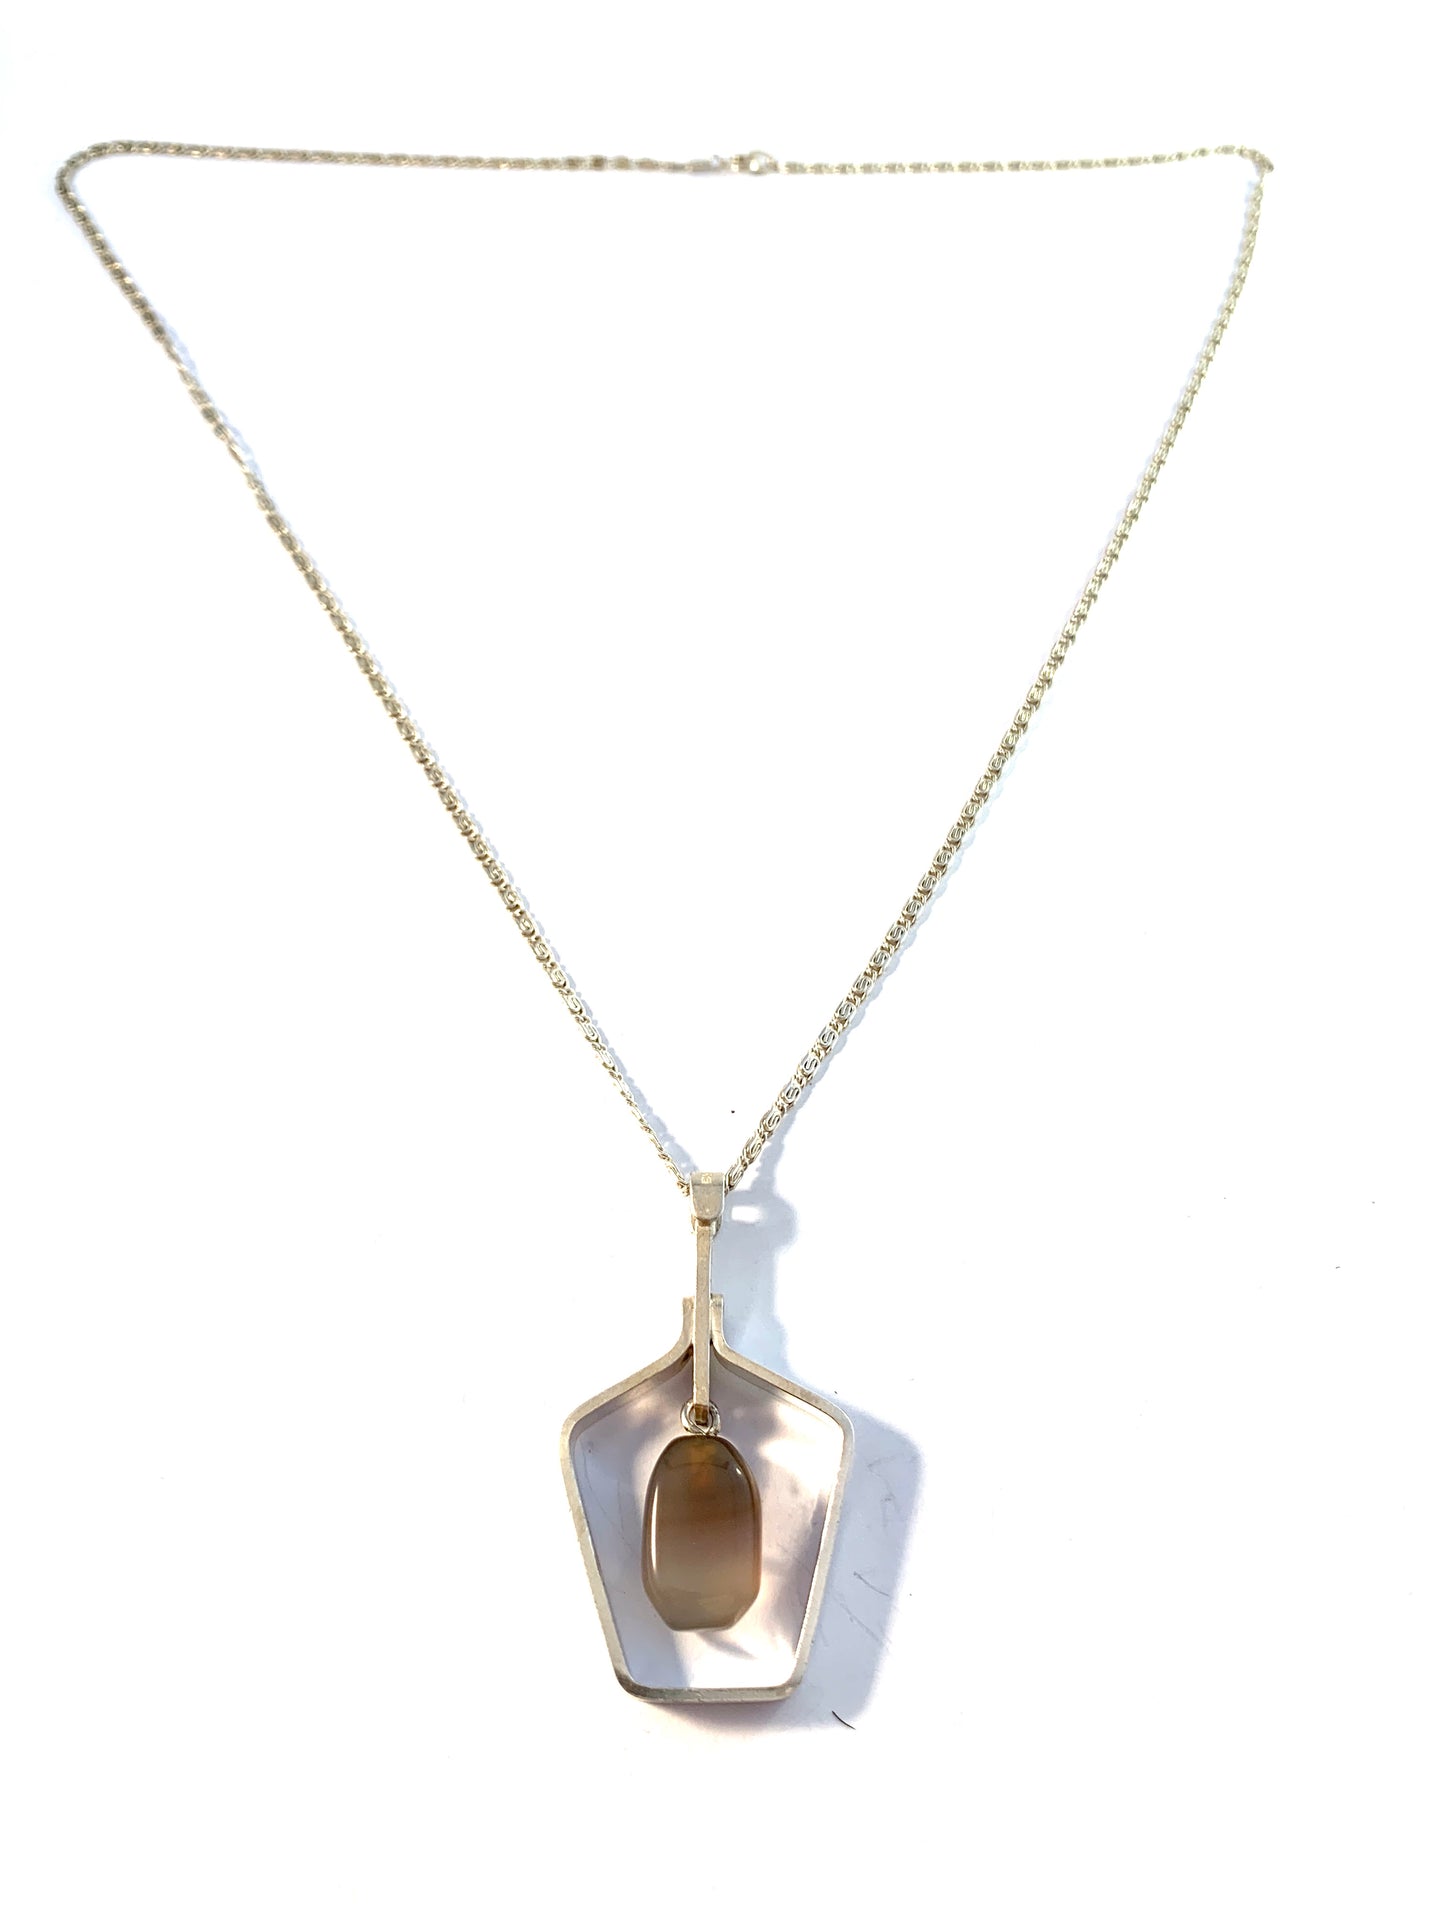 Hedbergs, Sweden year 1959. Solid Silver Chalcedony Pendant Necklace.